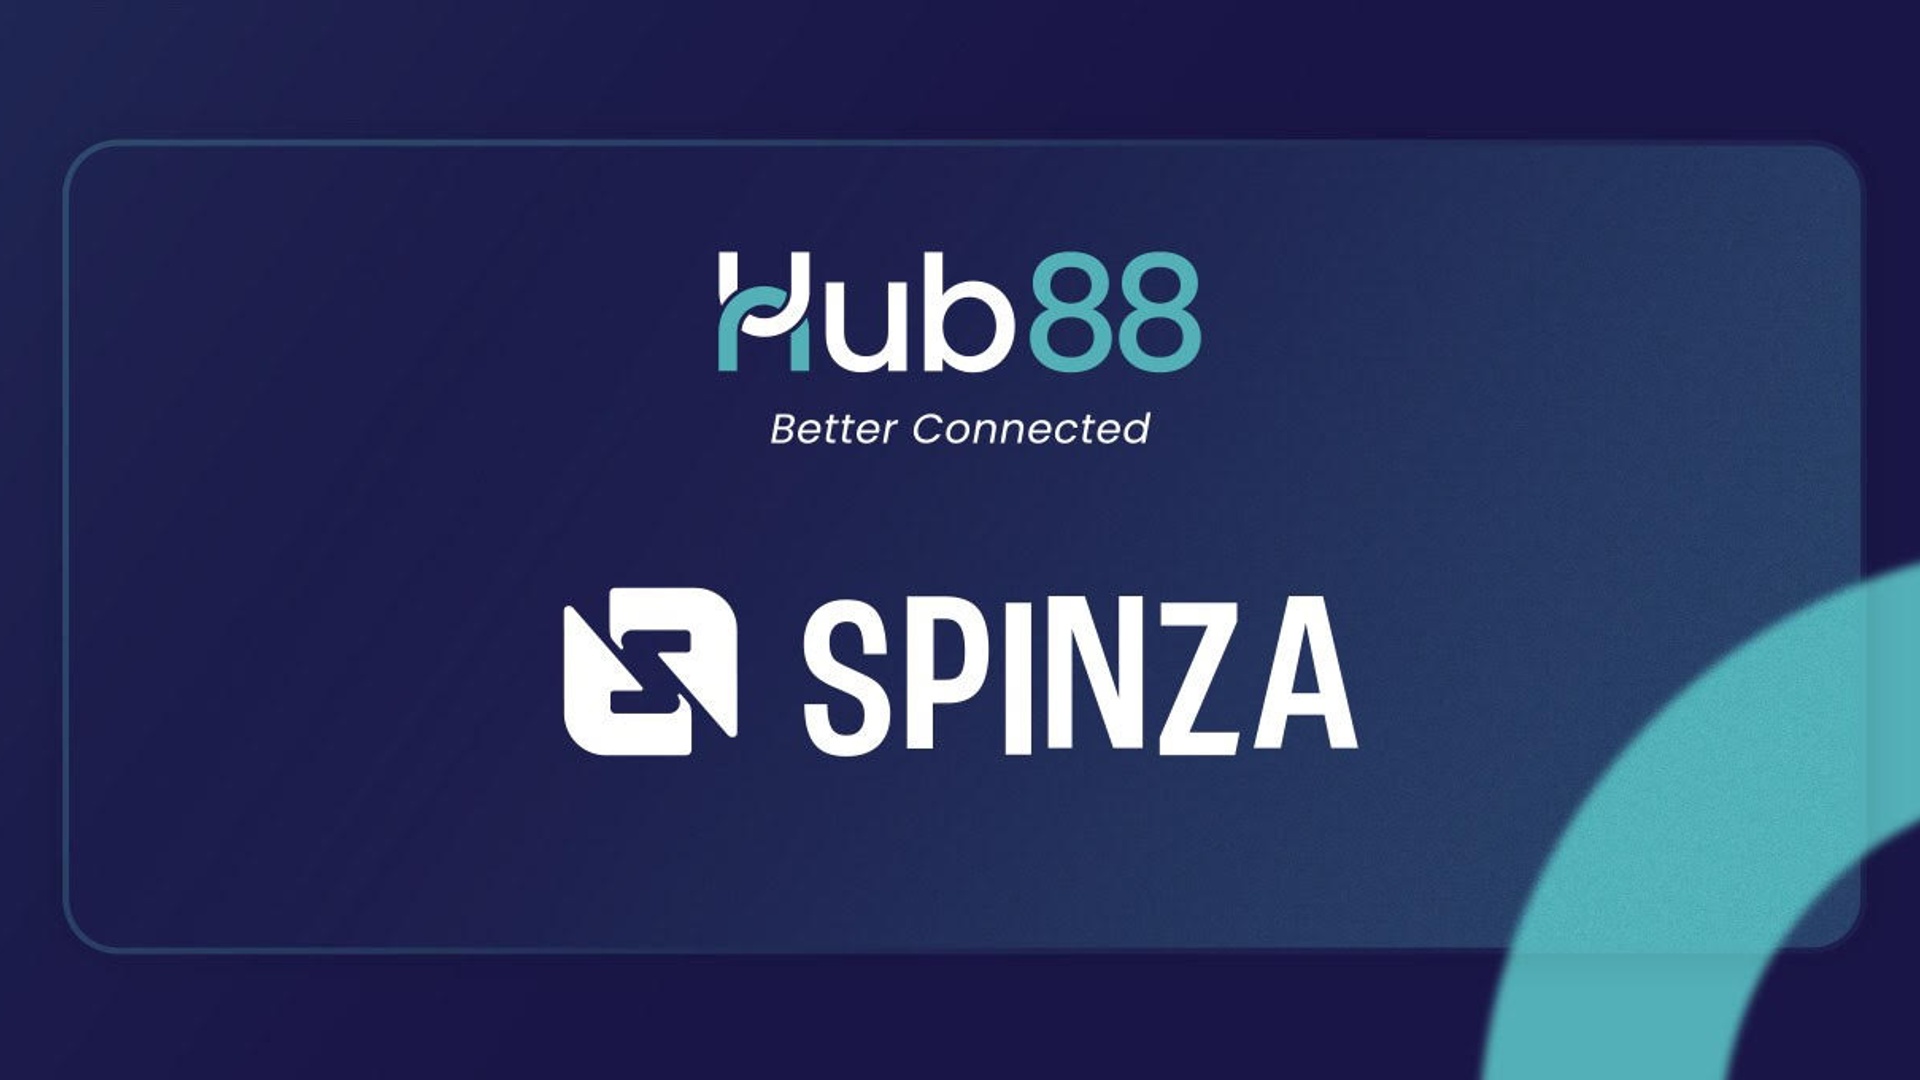 Cover Image for Spinza makes waves worldwide driven by Hub88 content agreement 